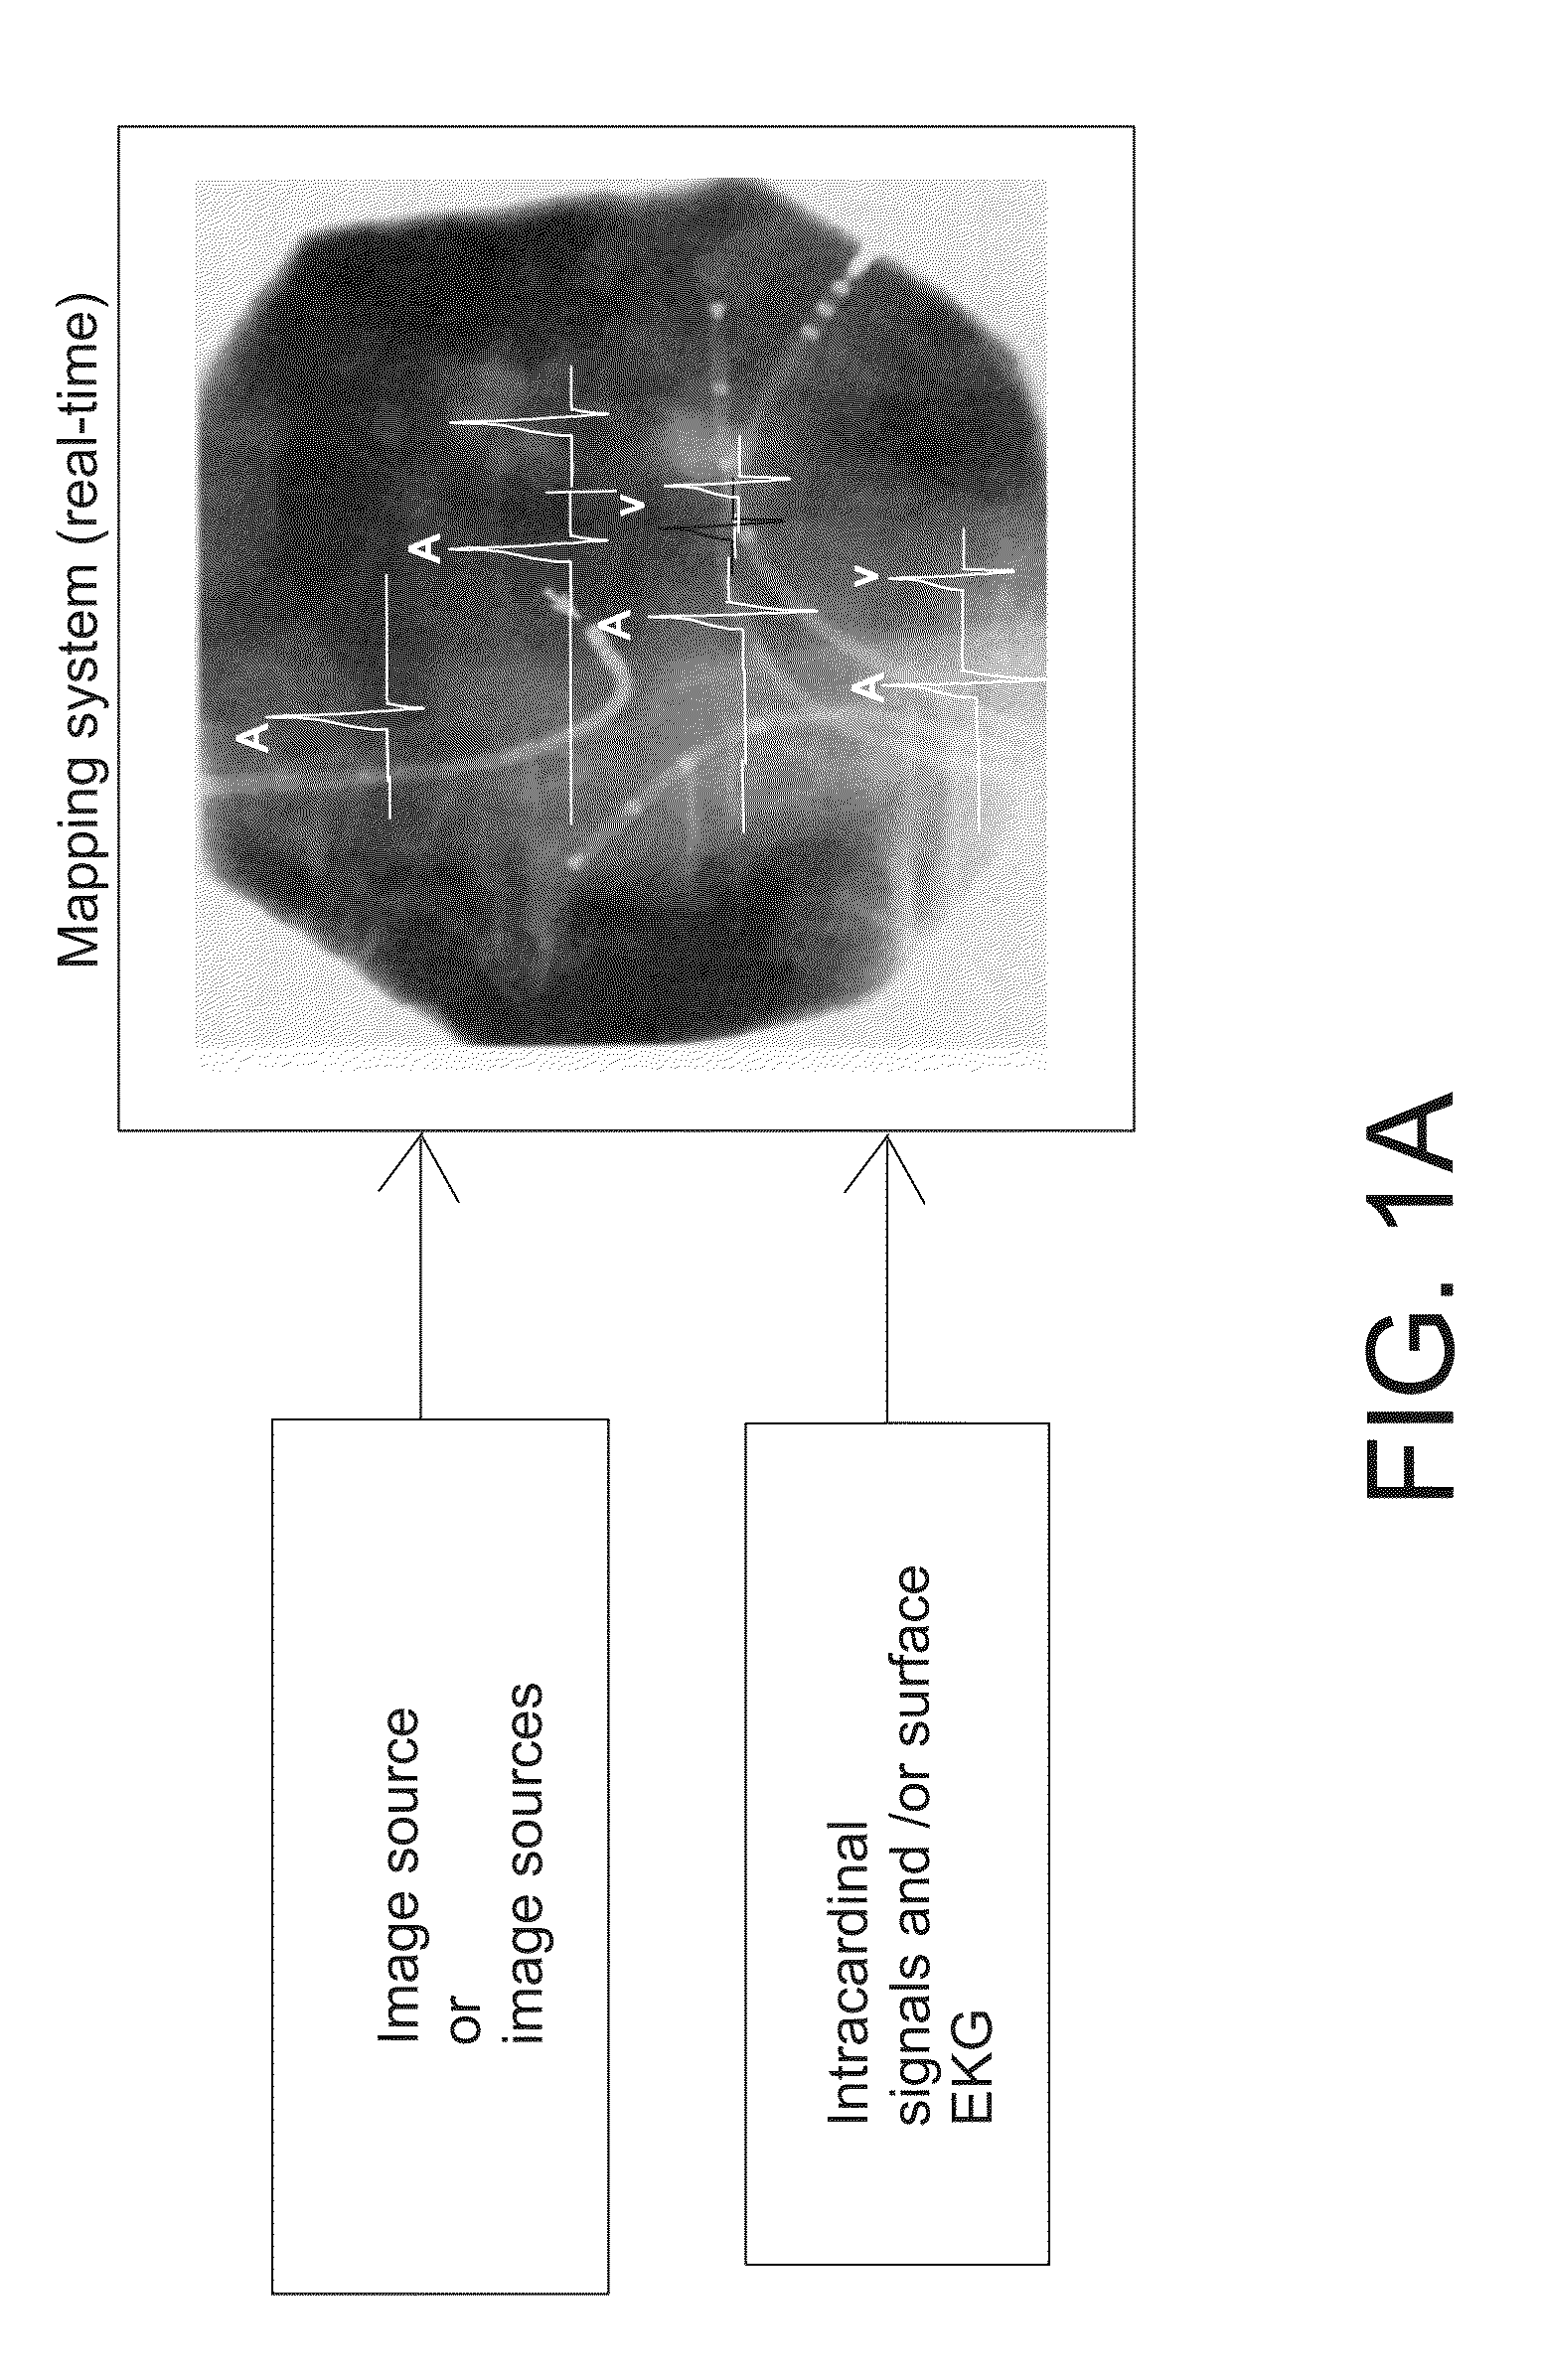 System and methods for real-time cardiac mapping